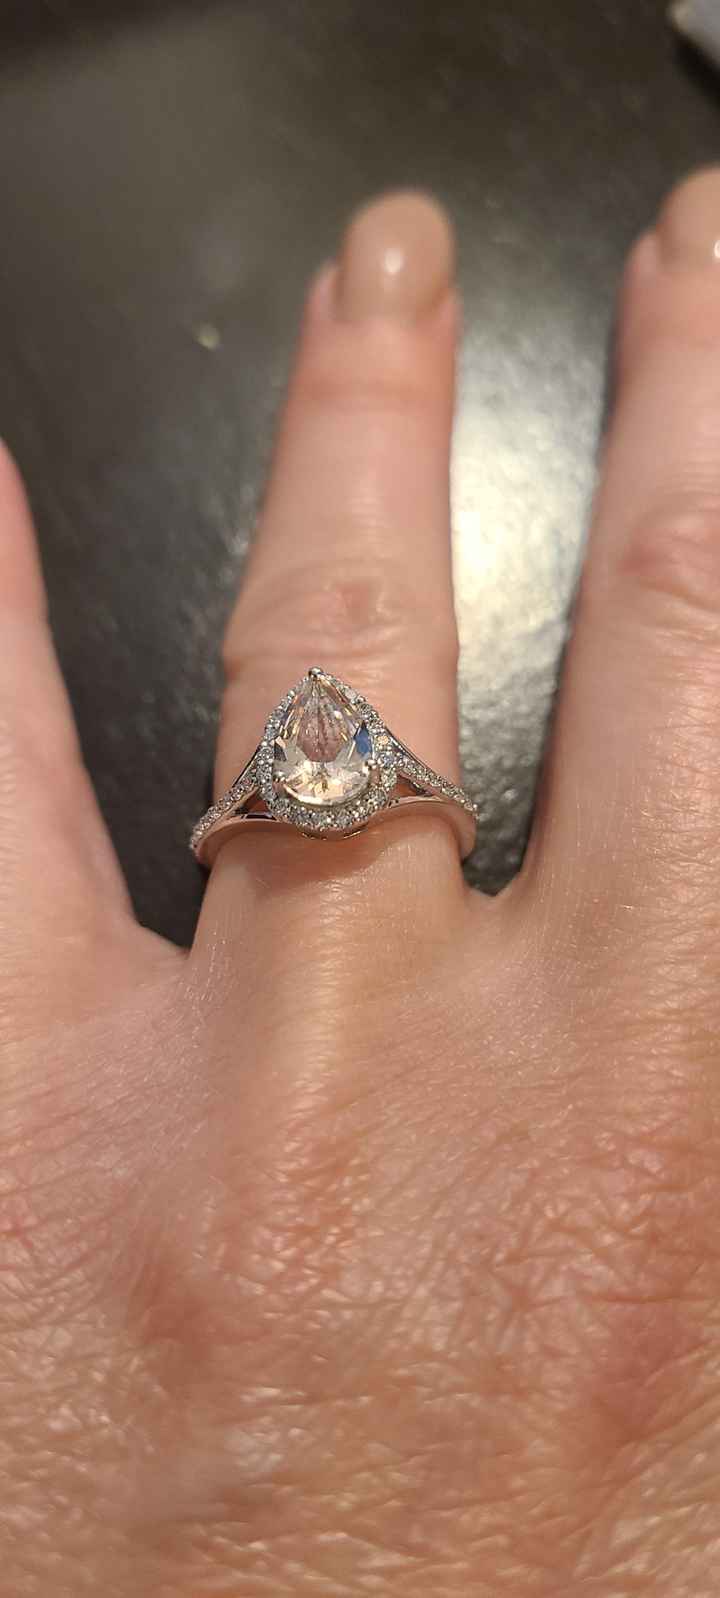 2023 Brides - Show us your ring! 2